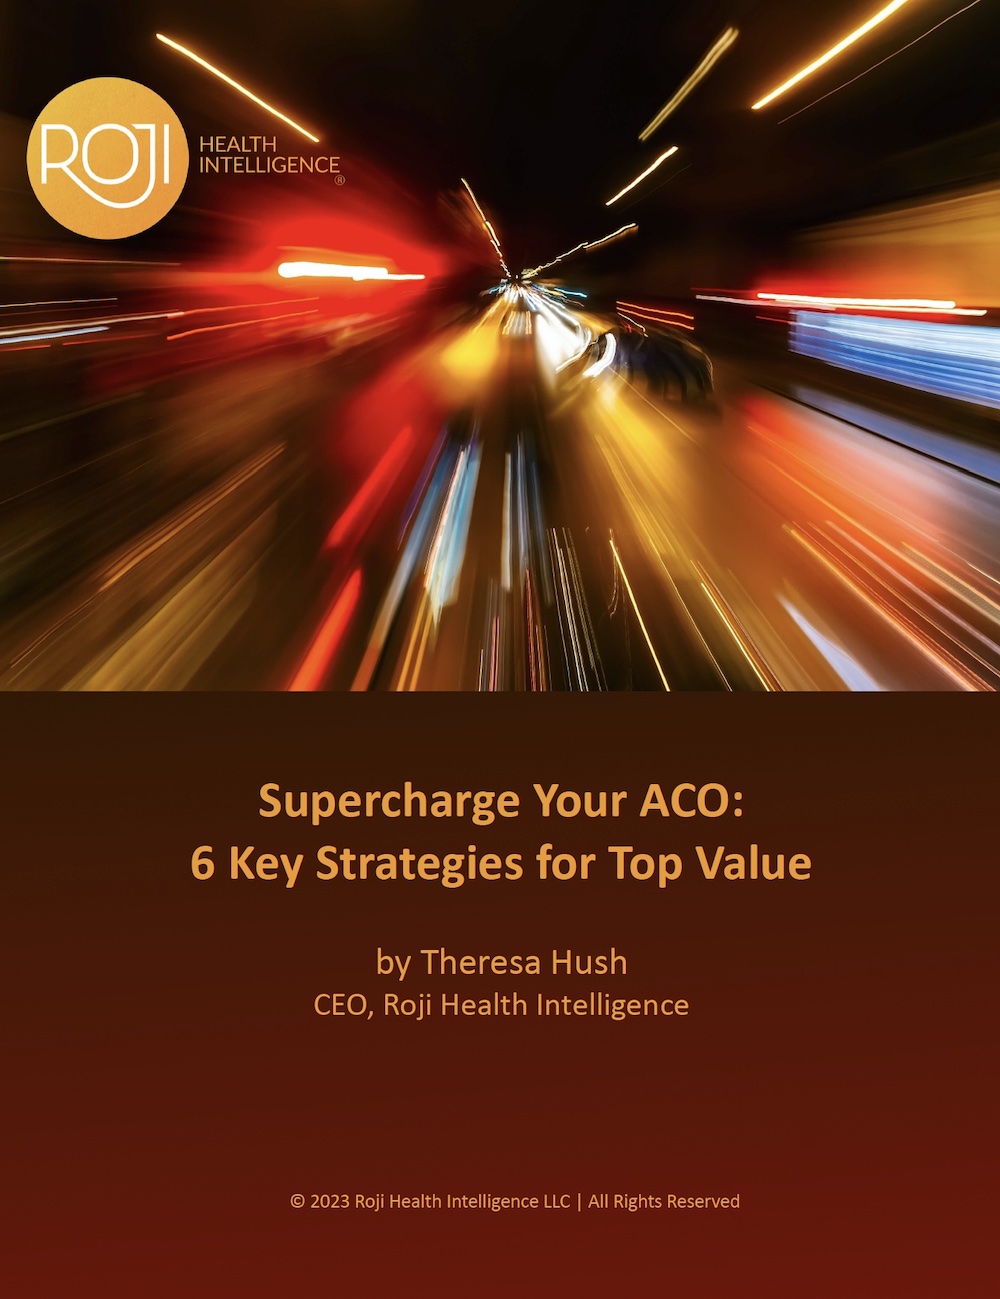 Supercharge Your ACO to Compete Under Risk